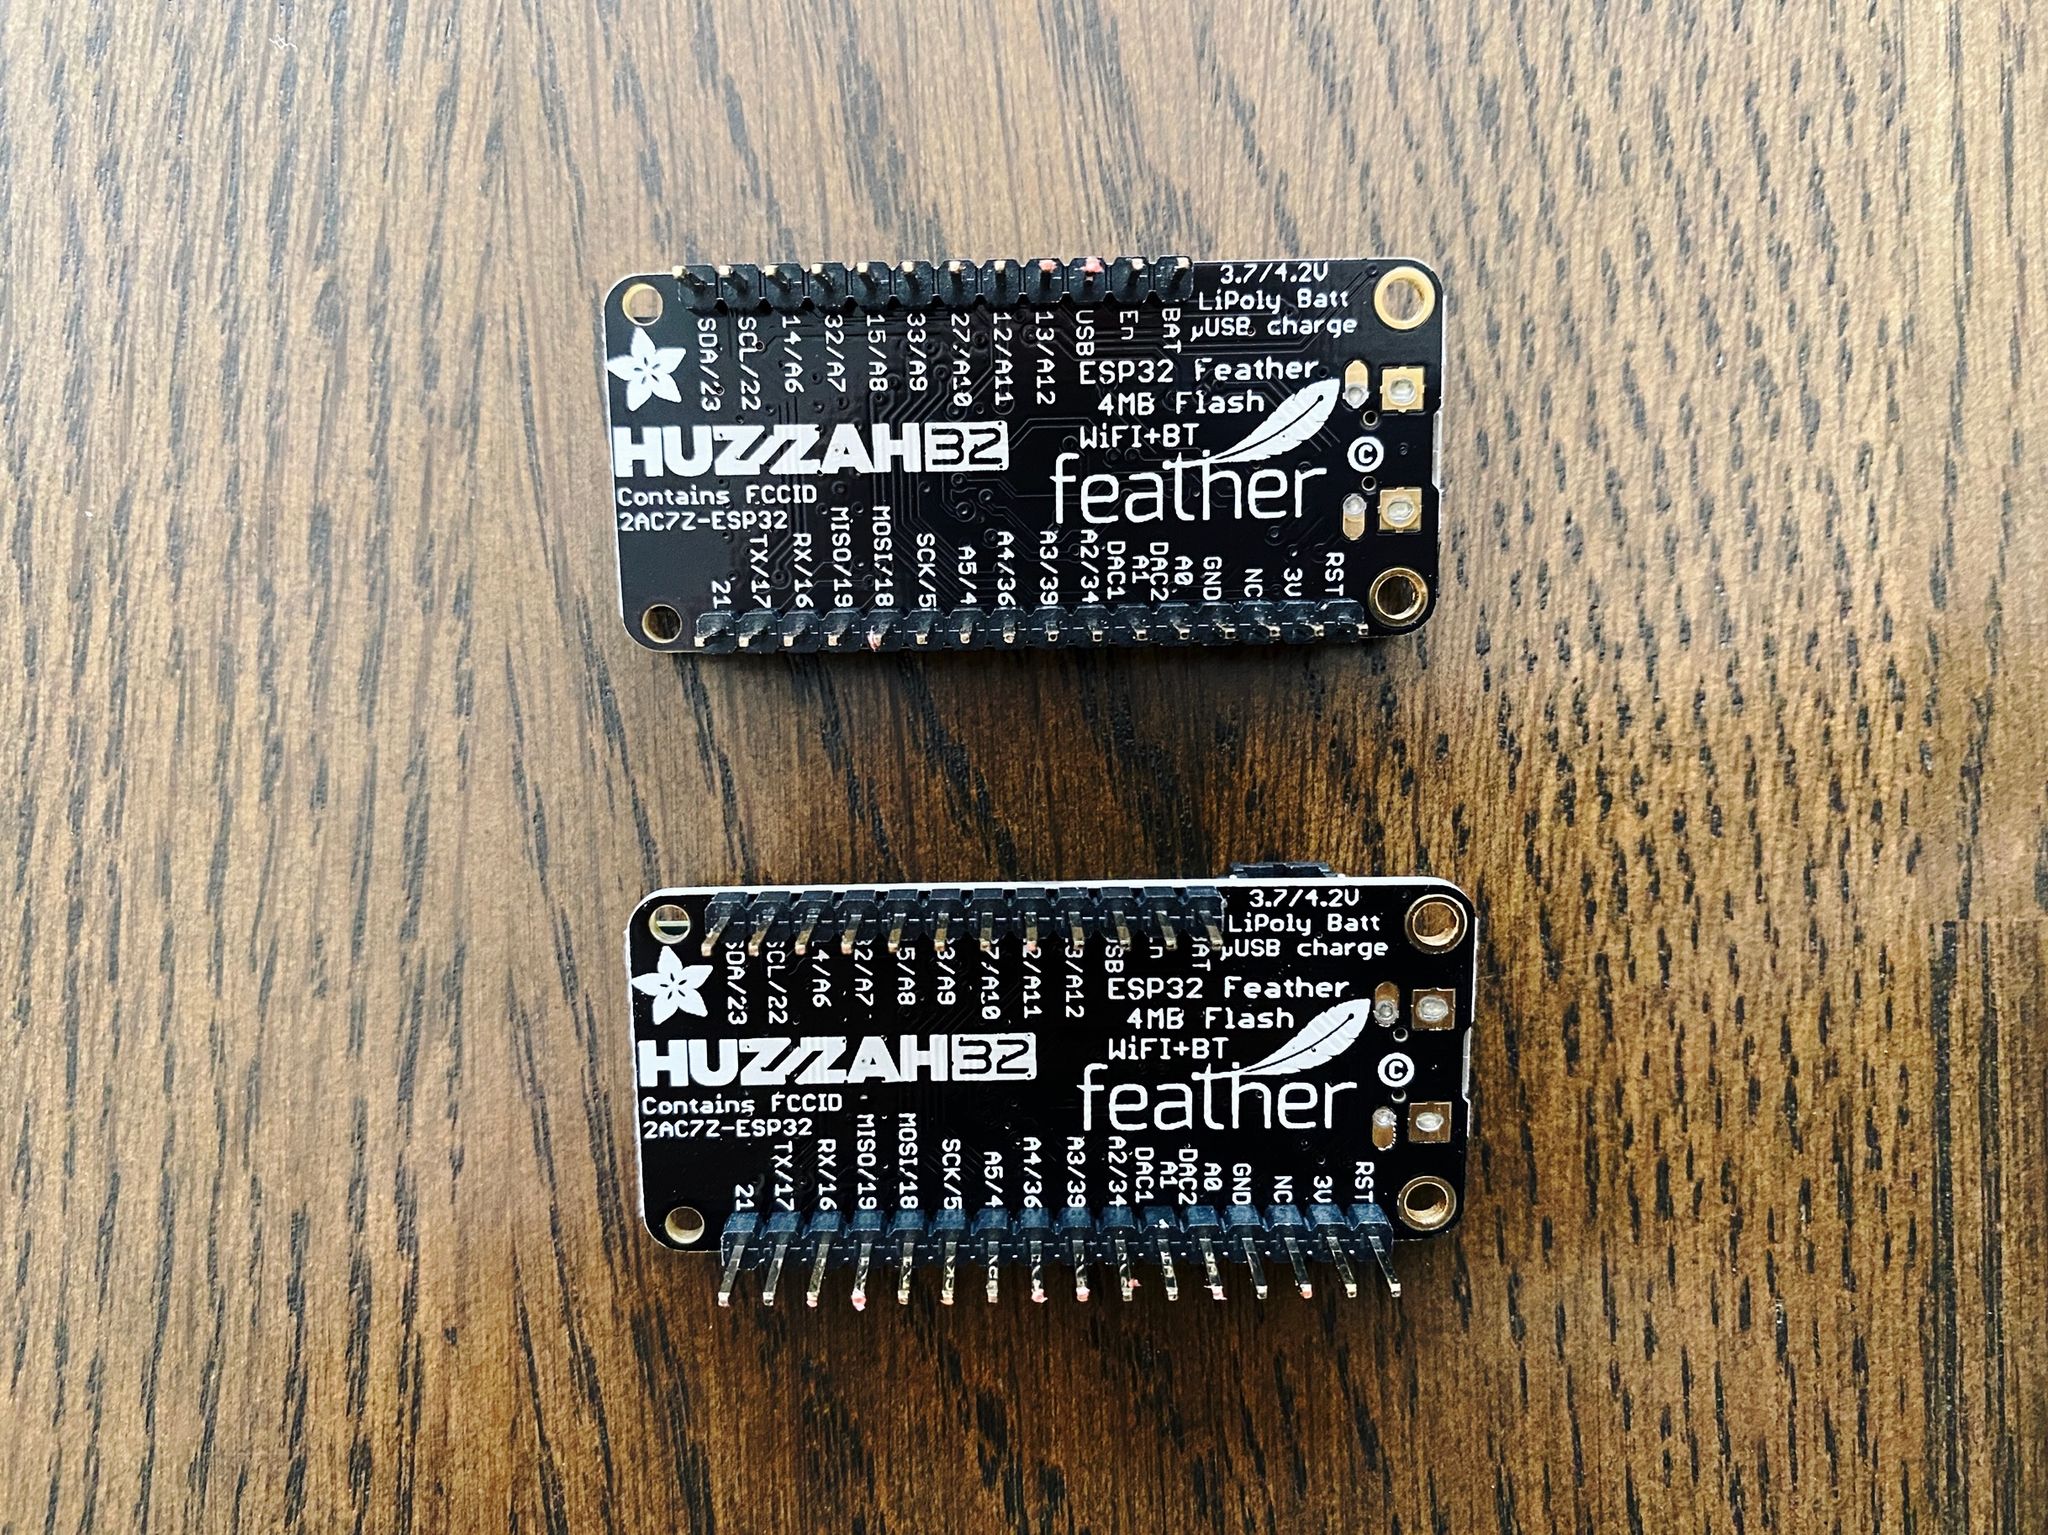 A photo of two small circuit boards with various chips on them.